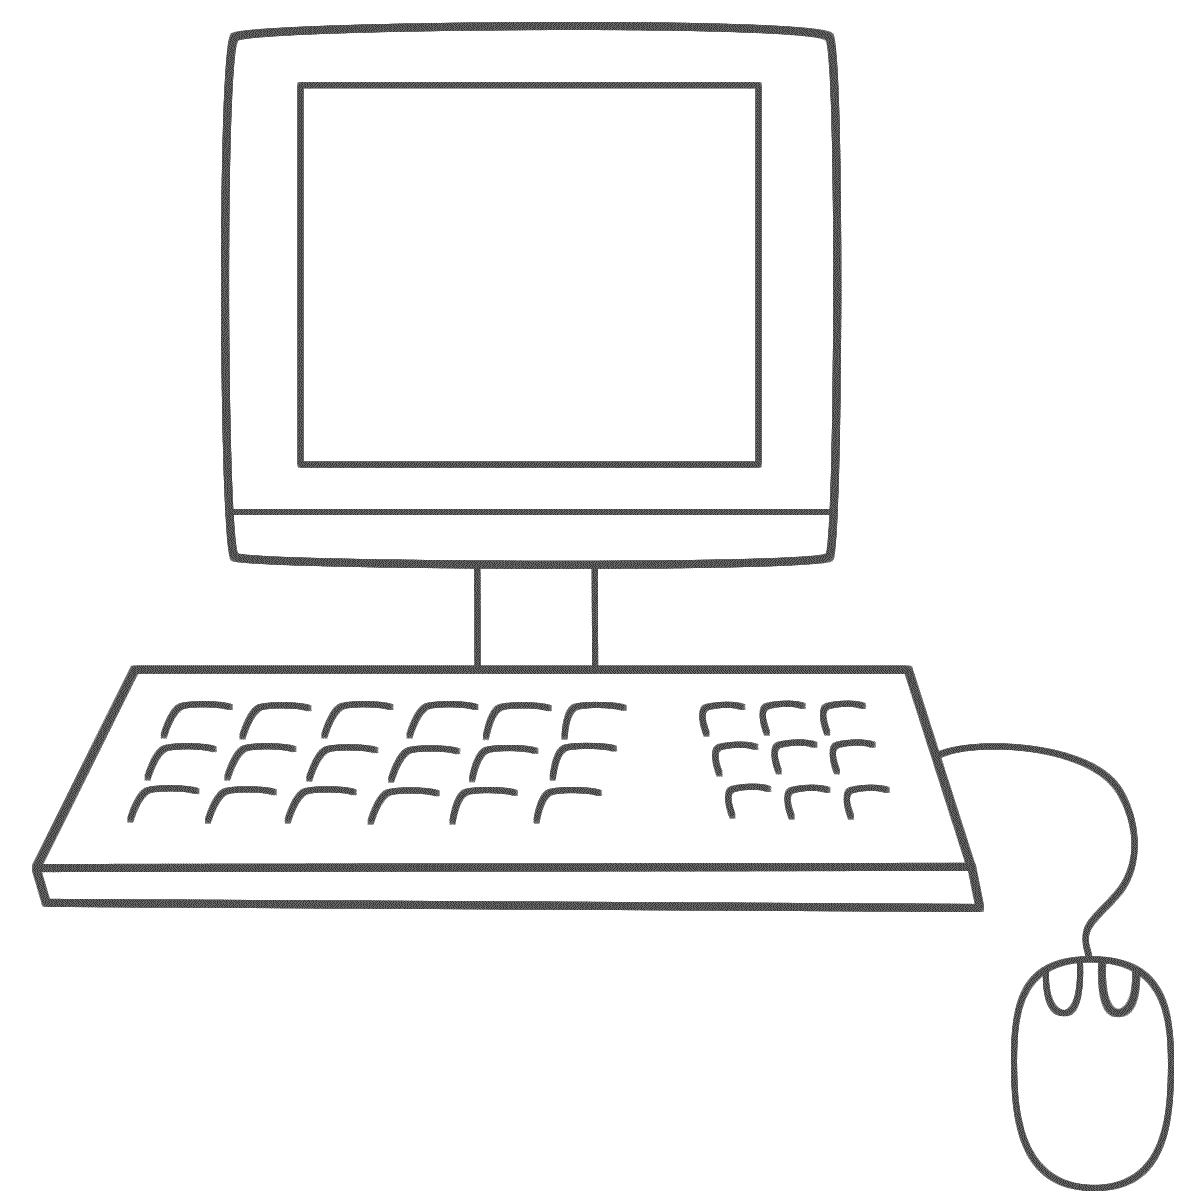 1 computer coloring pages for kids Computer Coloring Pages